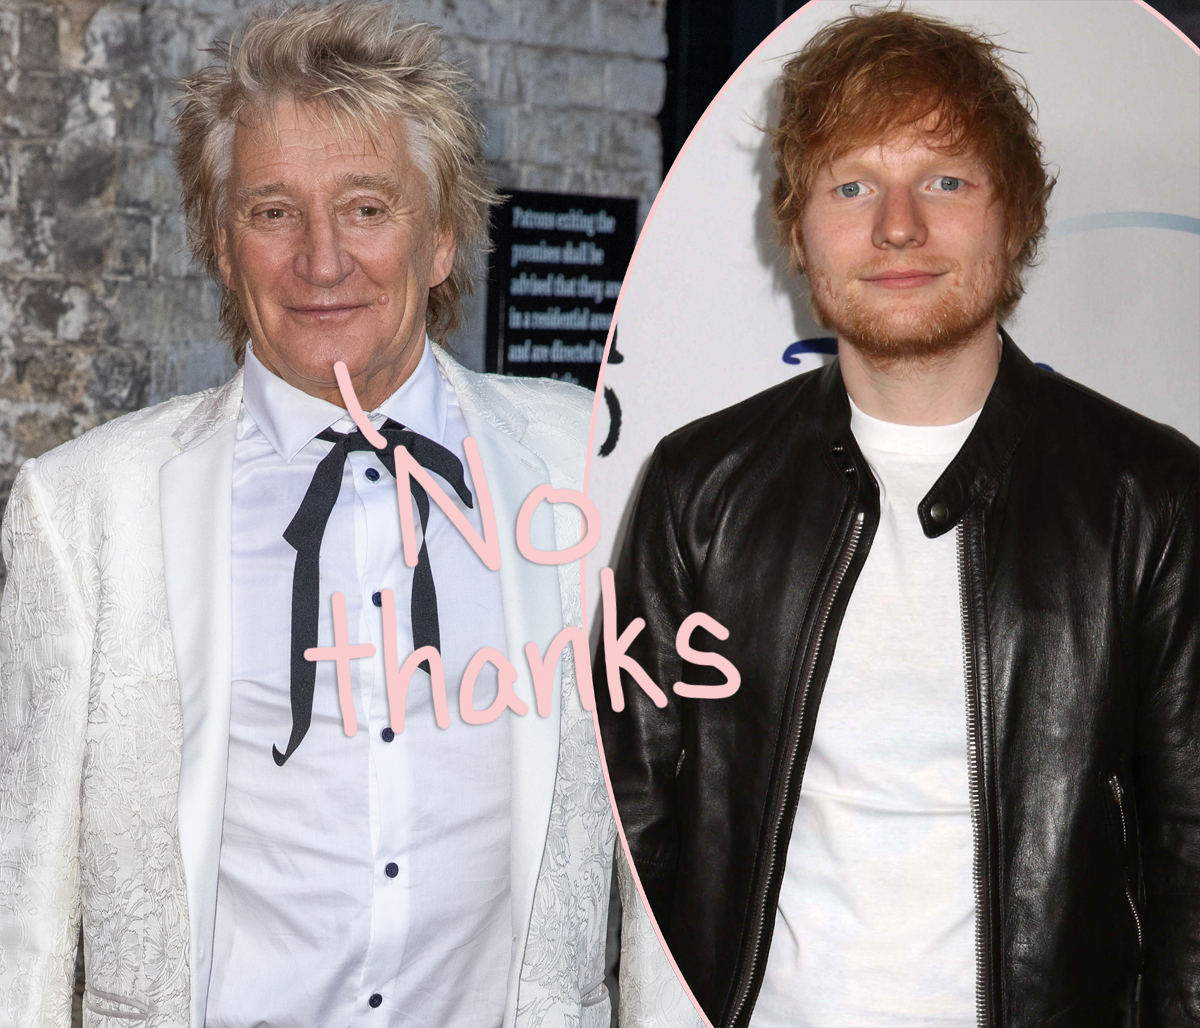 #Rod Stewart Shades The S**t Out Of Ed Sheeran’s Music! OMG This Is BRUTAL!